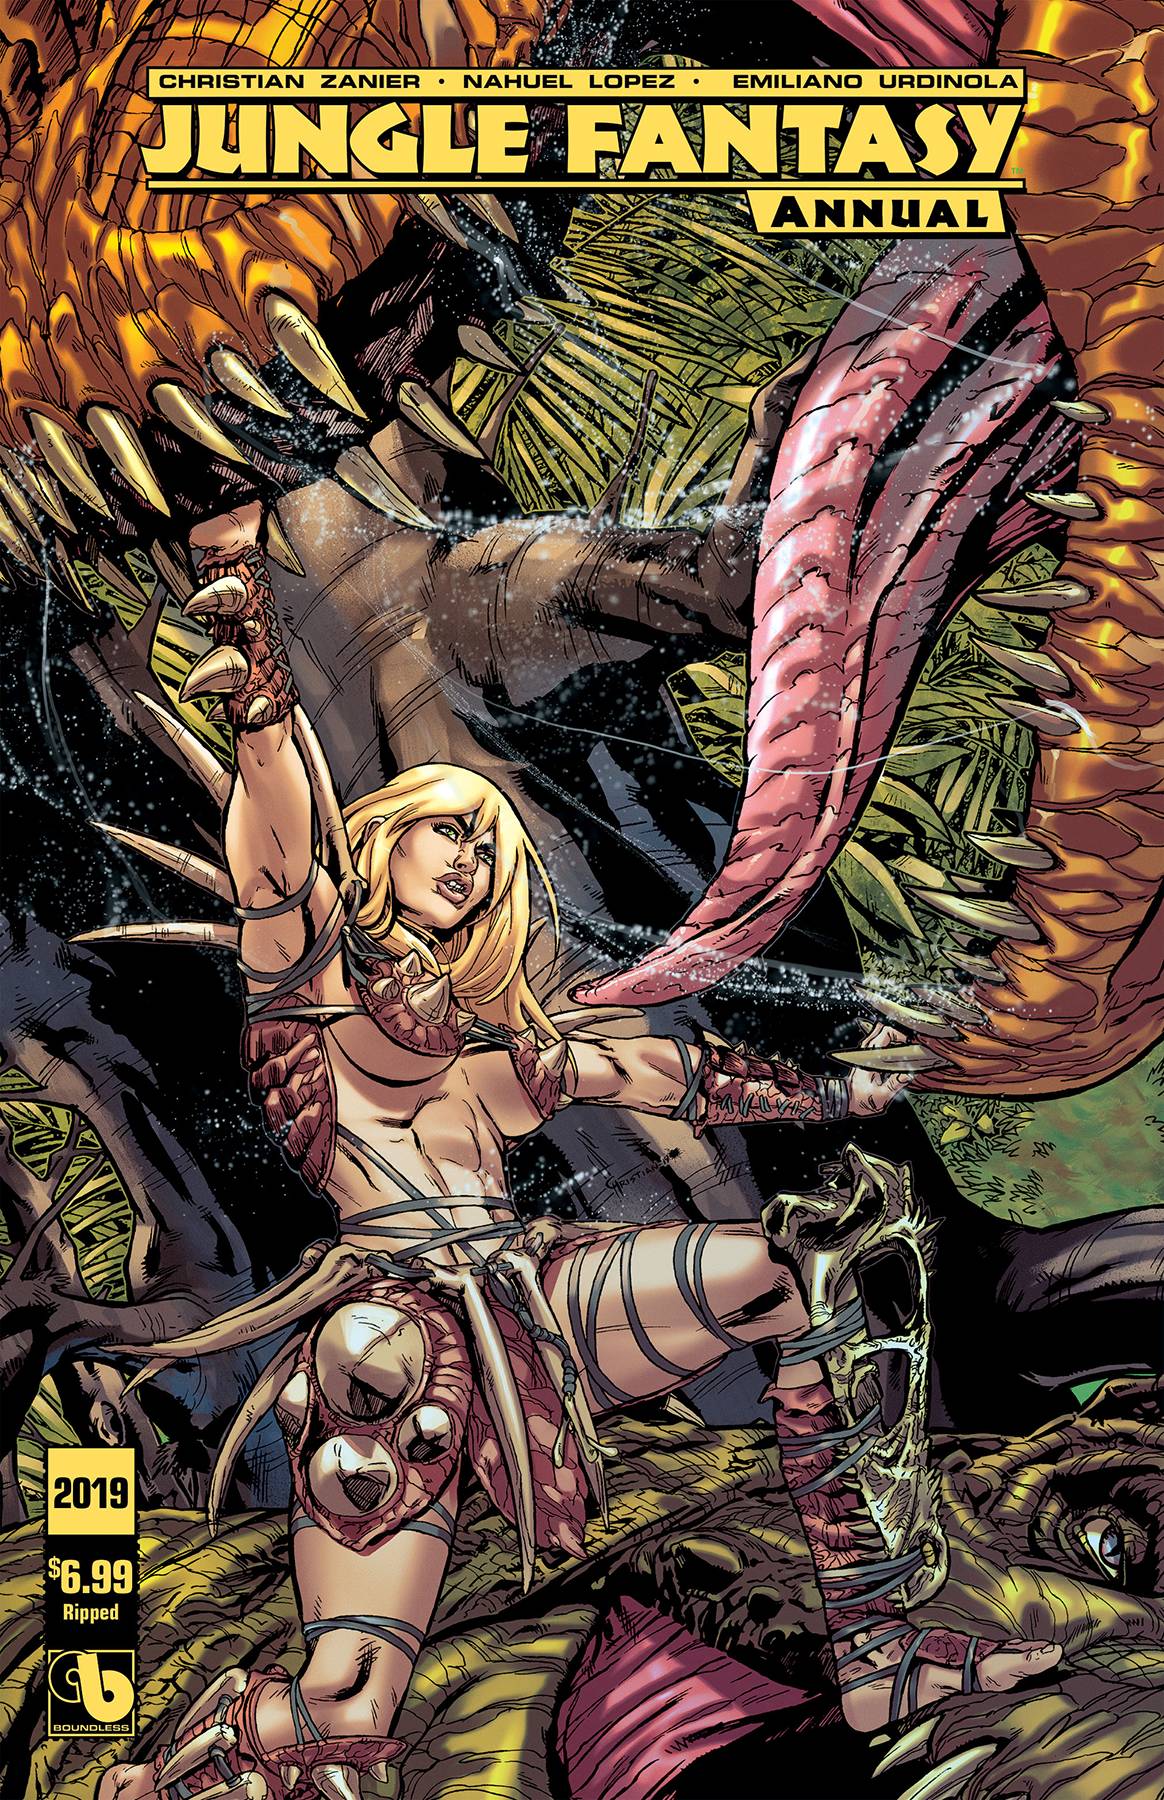 Jungle Fantasy: Annual 2019 (Ripped) by Emiliano Urdinola published by  Boundless Comics @ ForbiddenPlanet.com - UK and Worldwide Cult  Entertainment Megastore